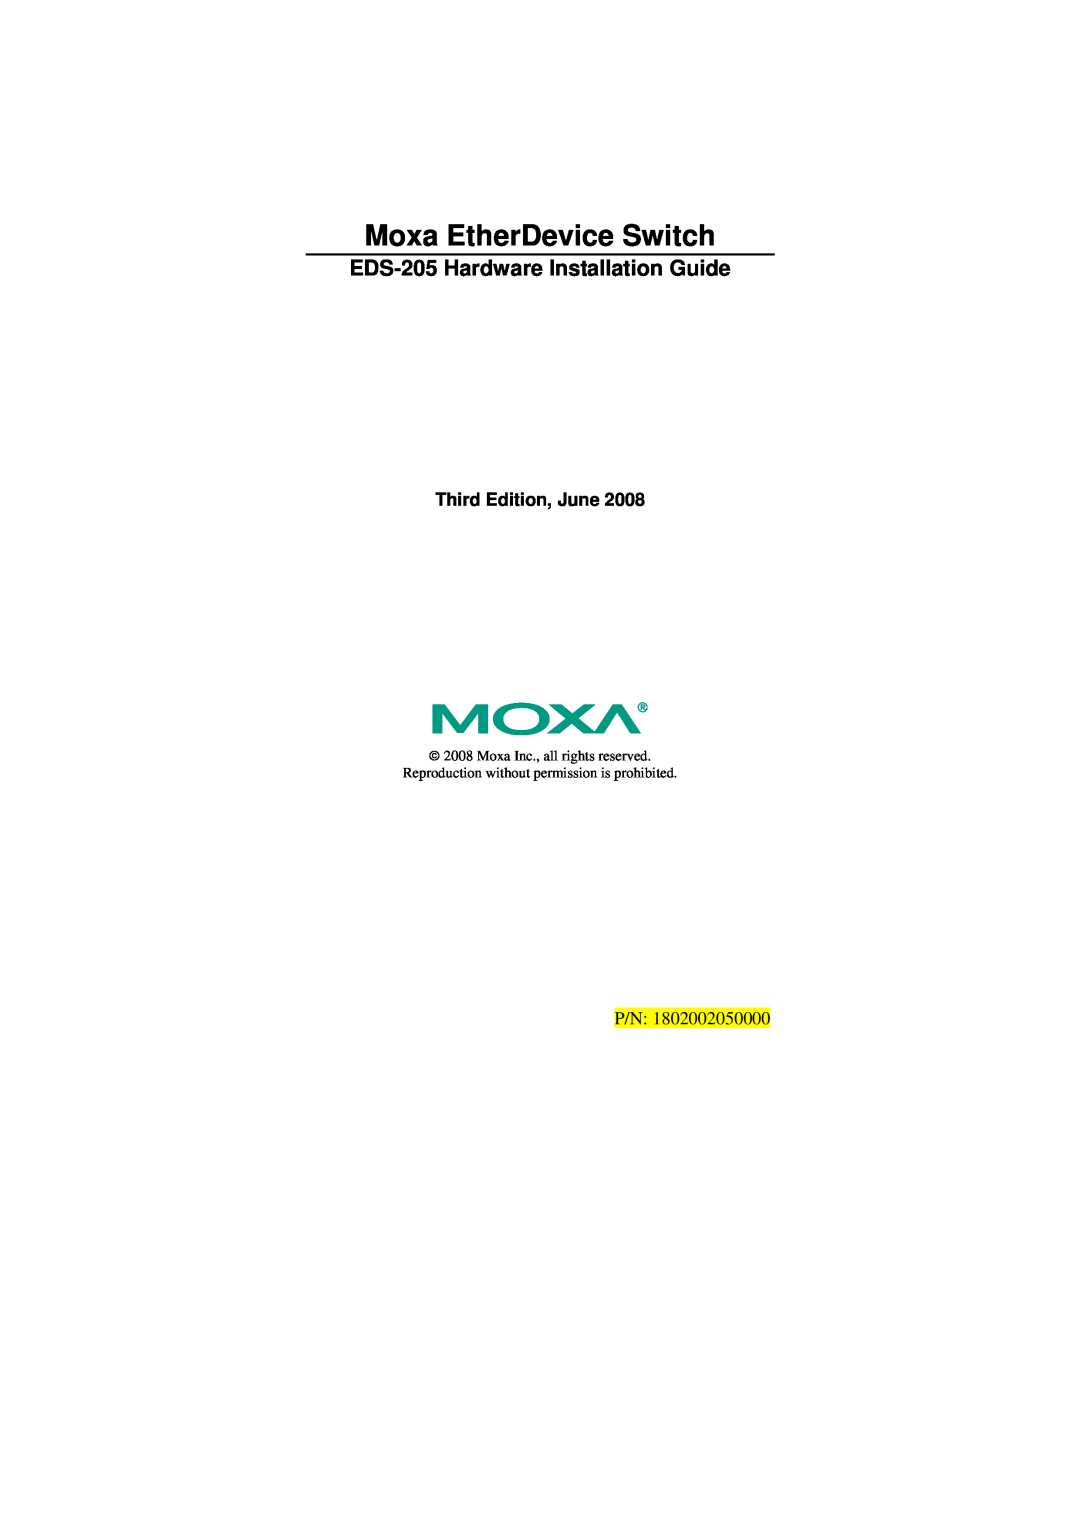 Moxa Technologies manual Moxa EtherDevice Switch, EDS-205 Hardware Installation Guide, Third Edition, June 